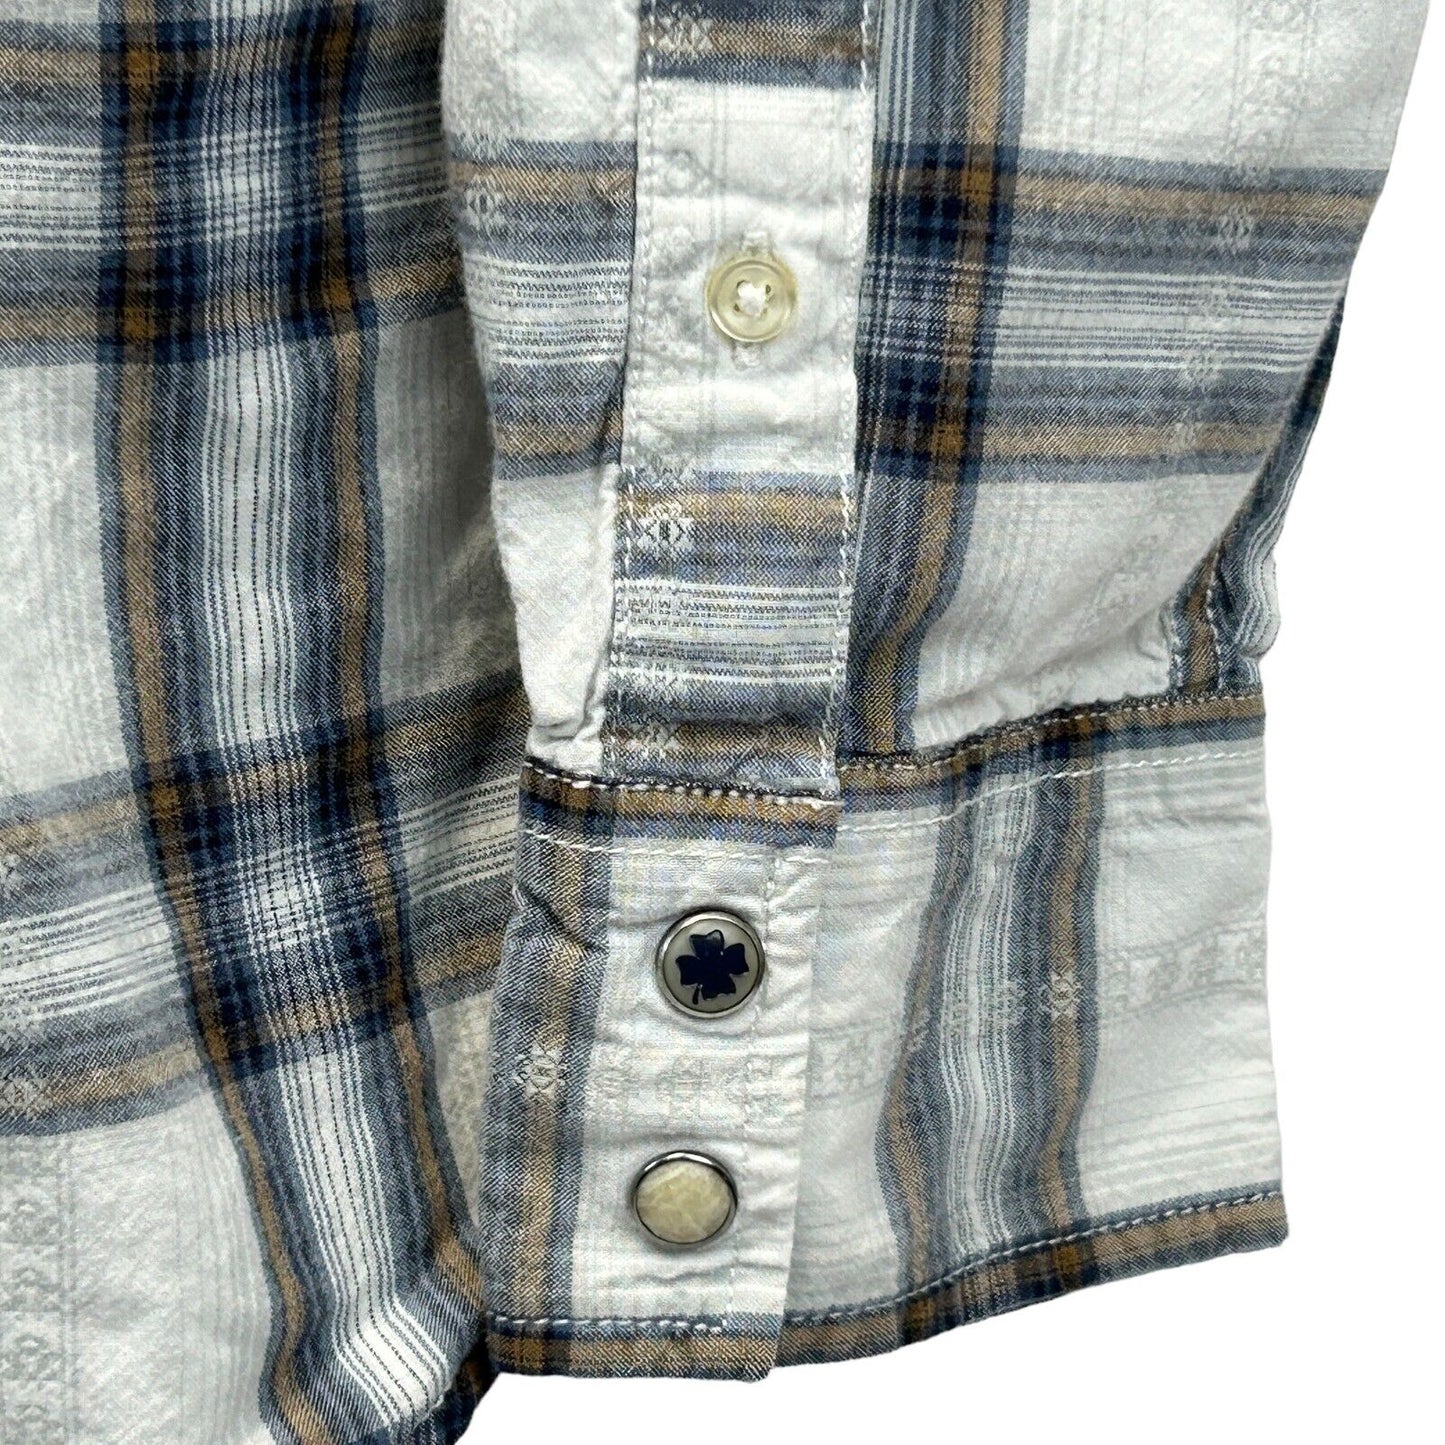 Lucky Brand Jeans Western Pearl Snap Button Front Shirt Medium Plaid Mens White